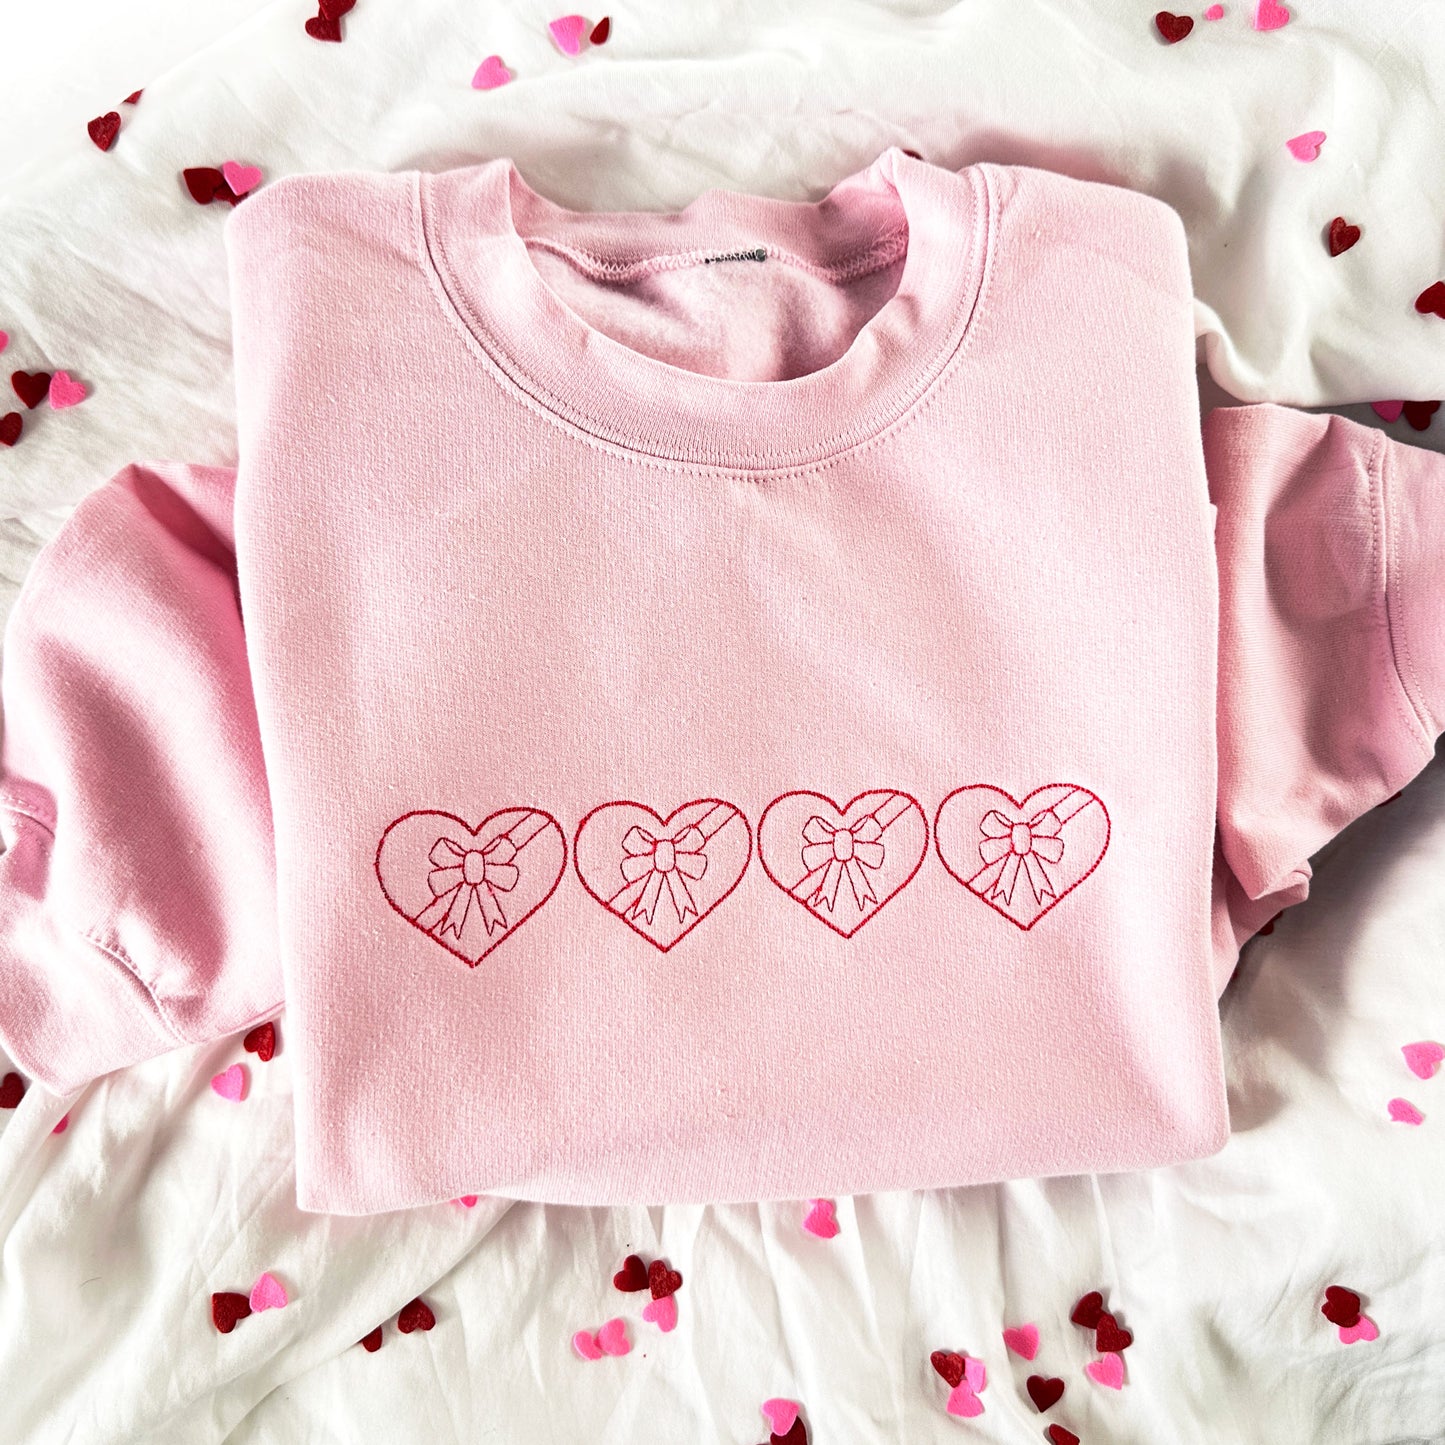 flat lay photo of a light pink crewneck sweatshirt with 4 stitched chocolates heart boxes with bows embroidered across the chest is raspberry thread